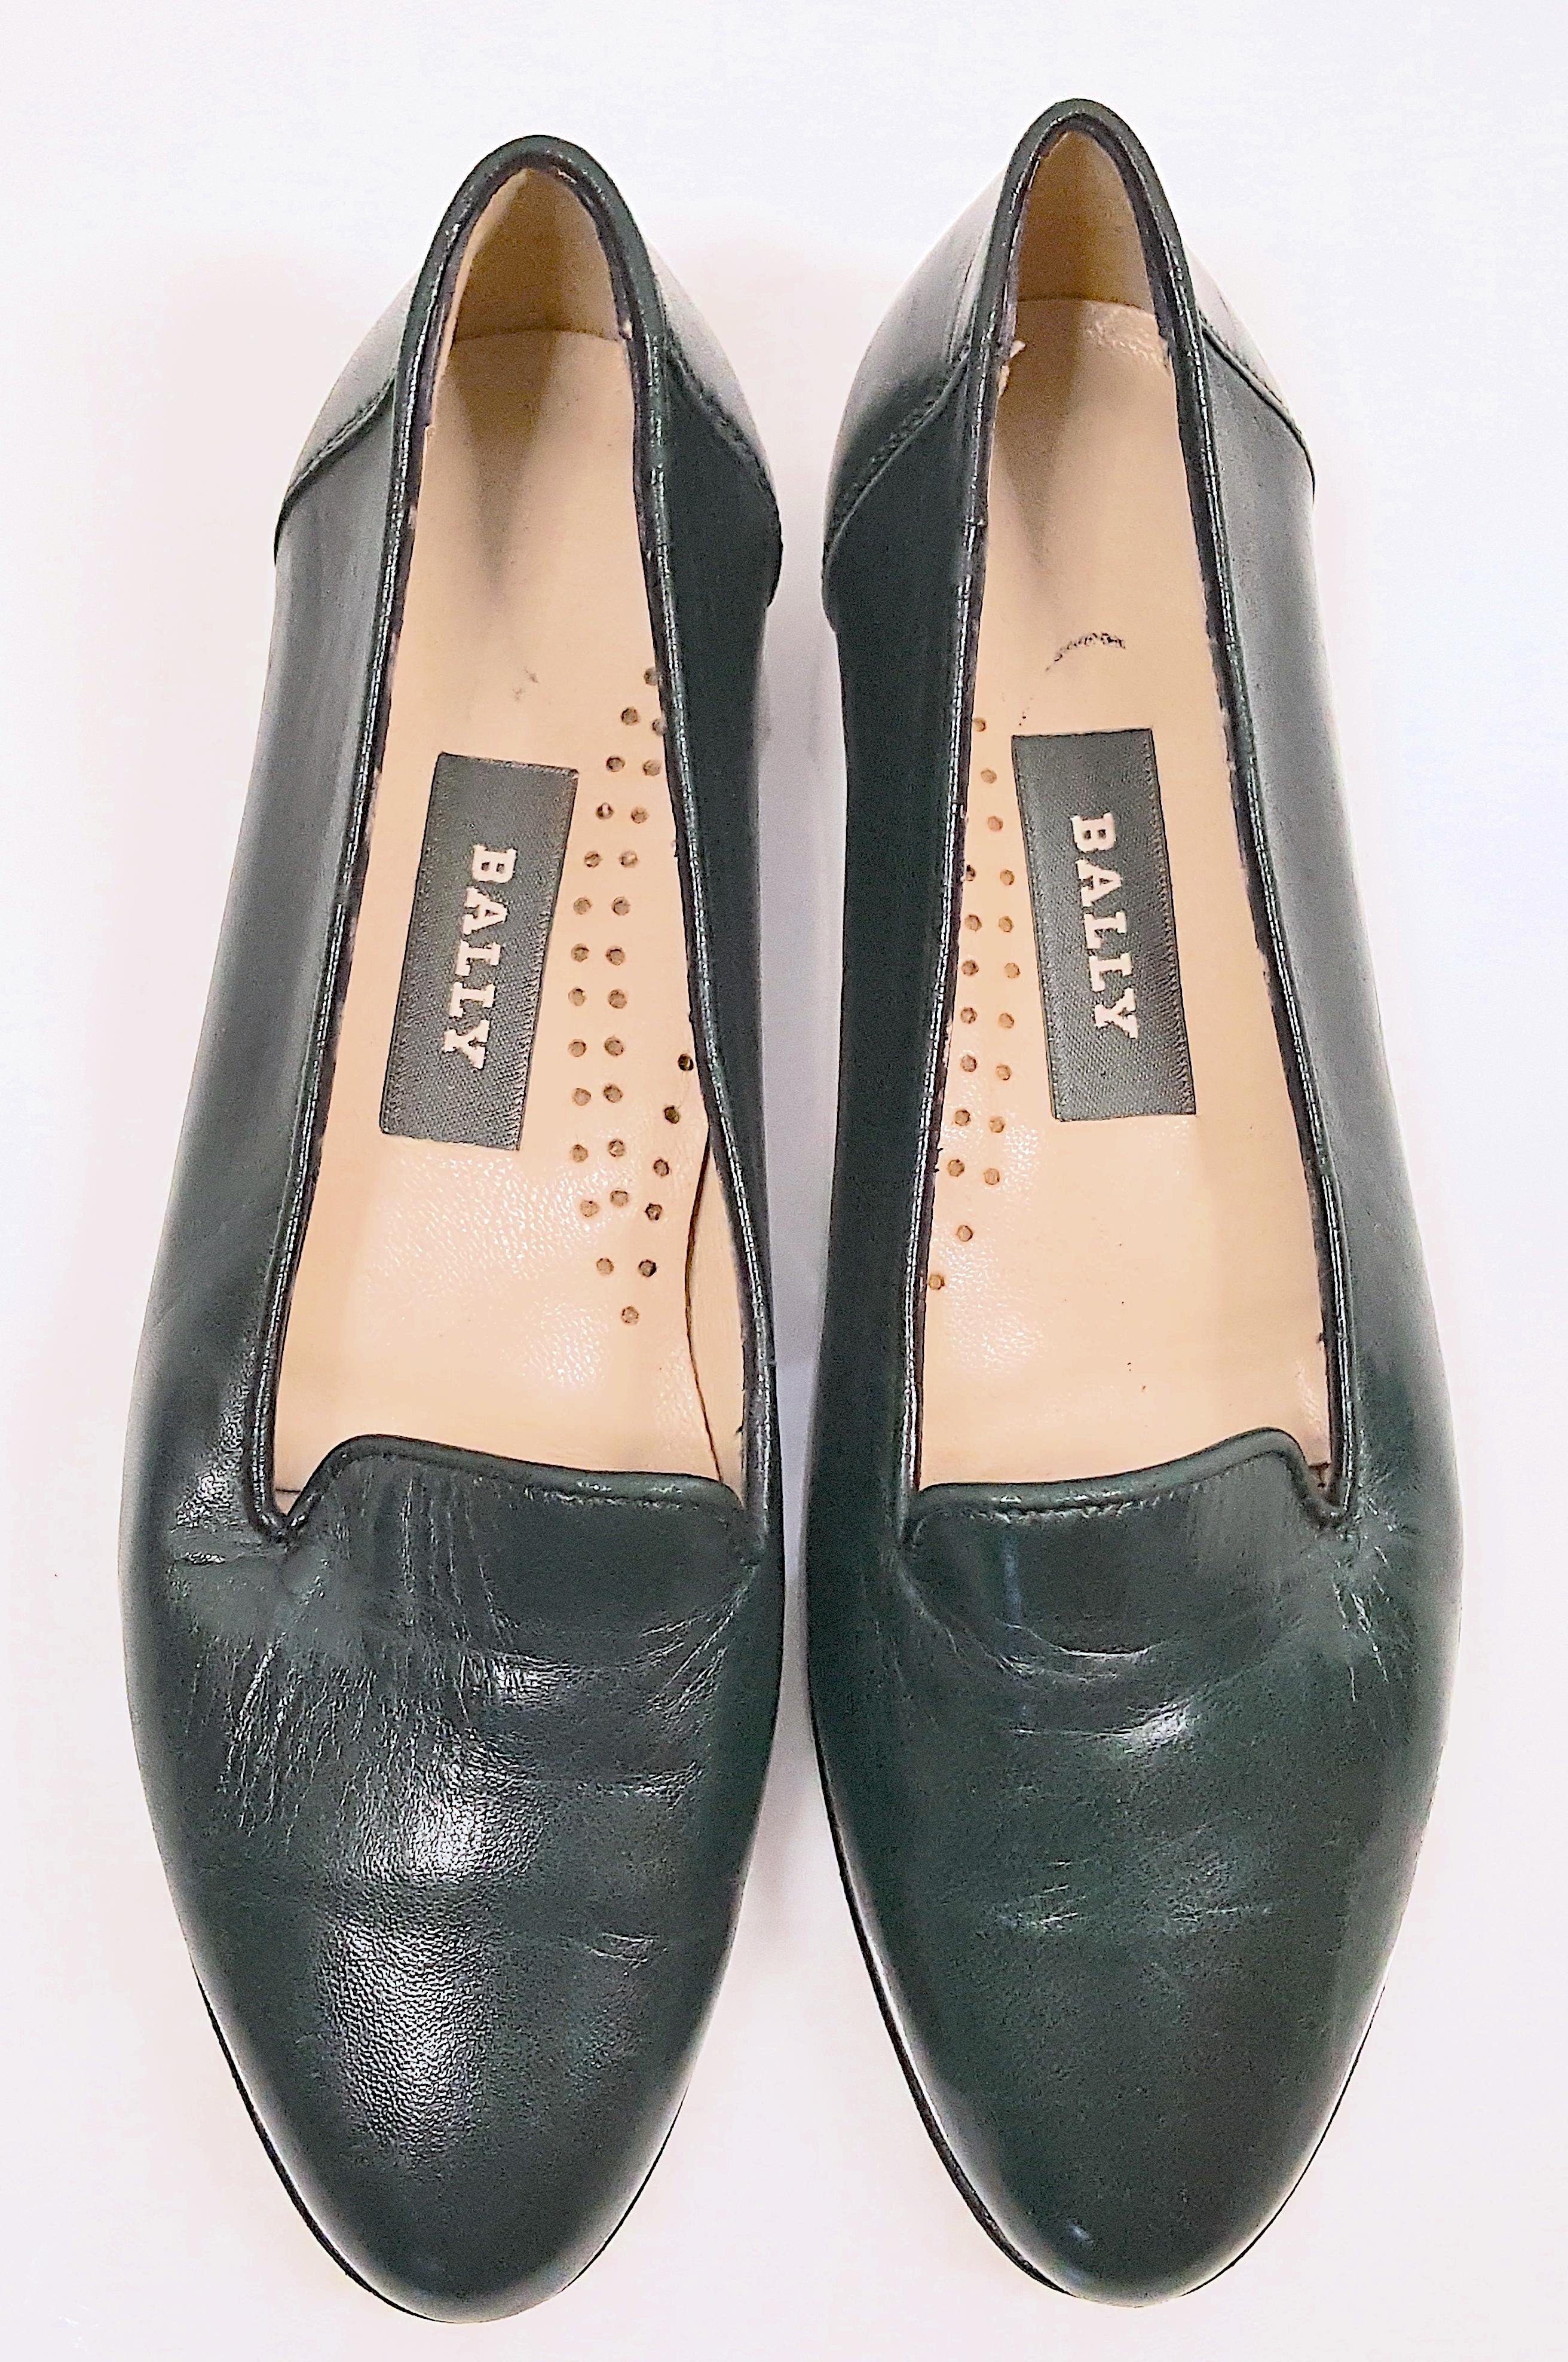 This Bally never-worn pair of luxurious nappa leather dark green almost-black slip-on shoes mixes the classic styles of a round-toe ballet flat and an unadorned sleek loafer with a low notched vamp and cushioned breathable arch in the branded